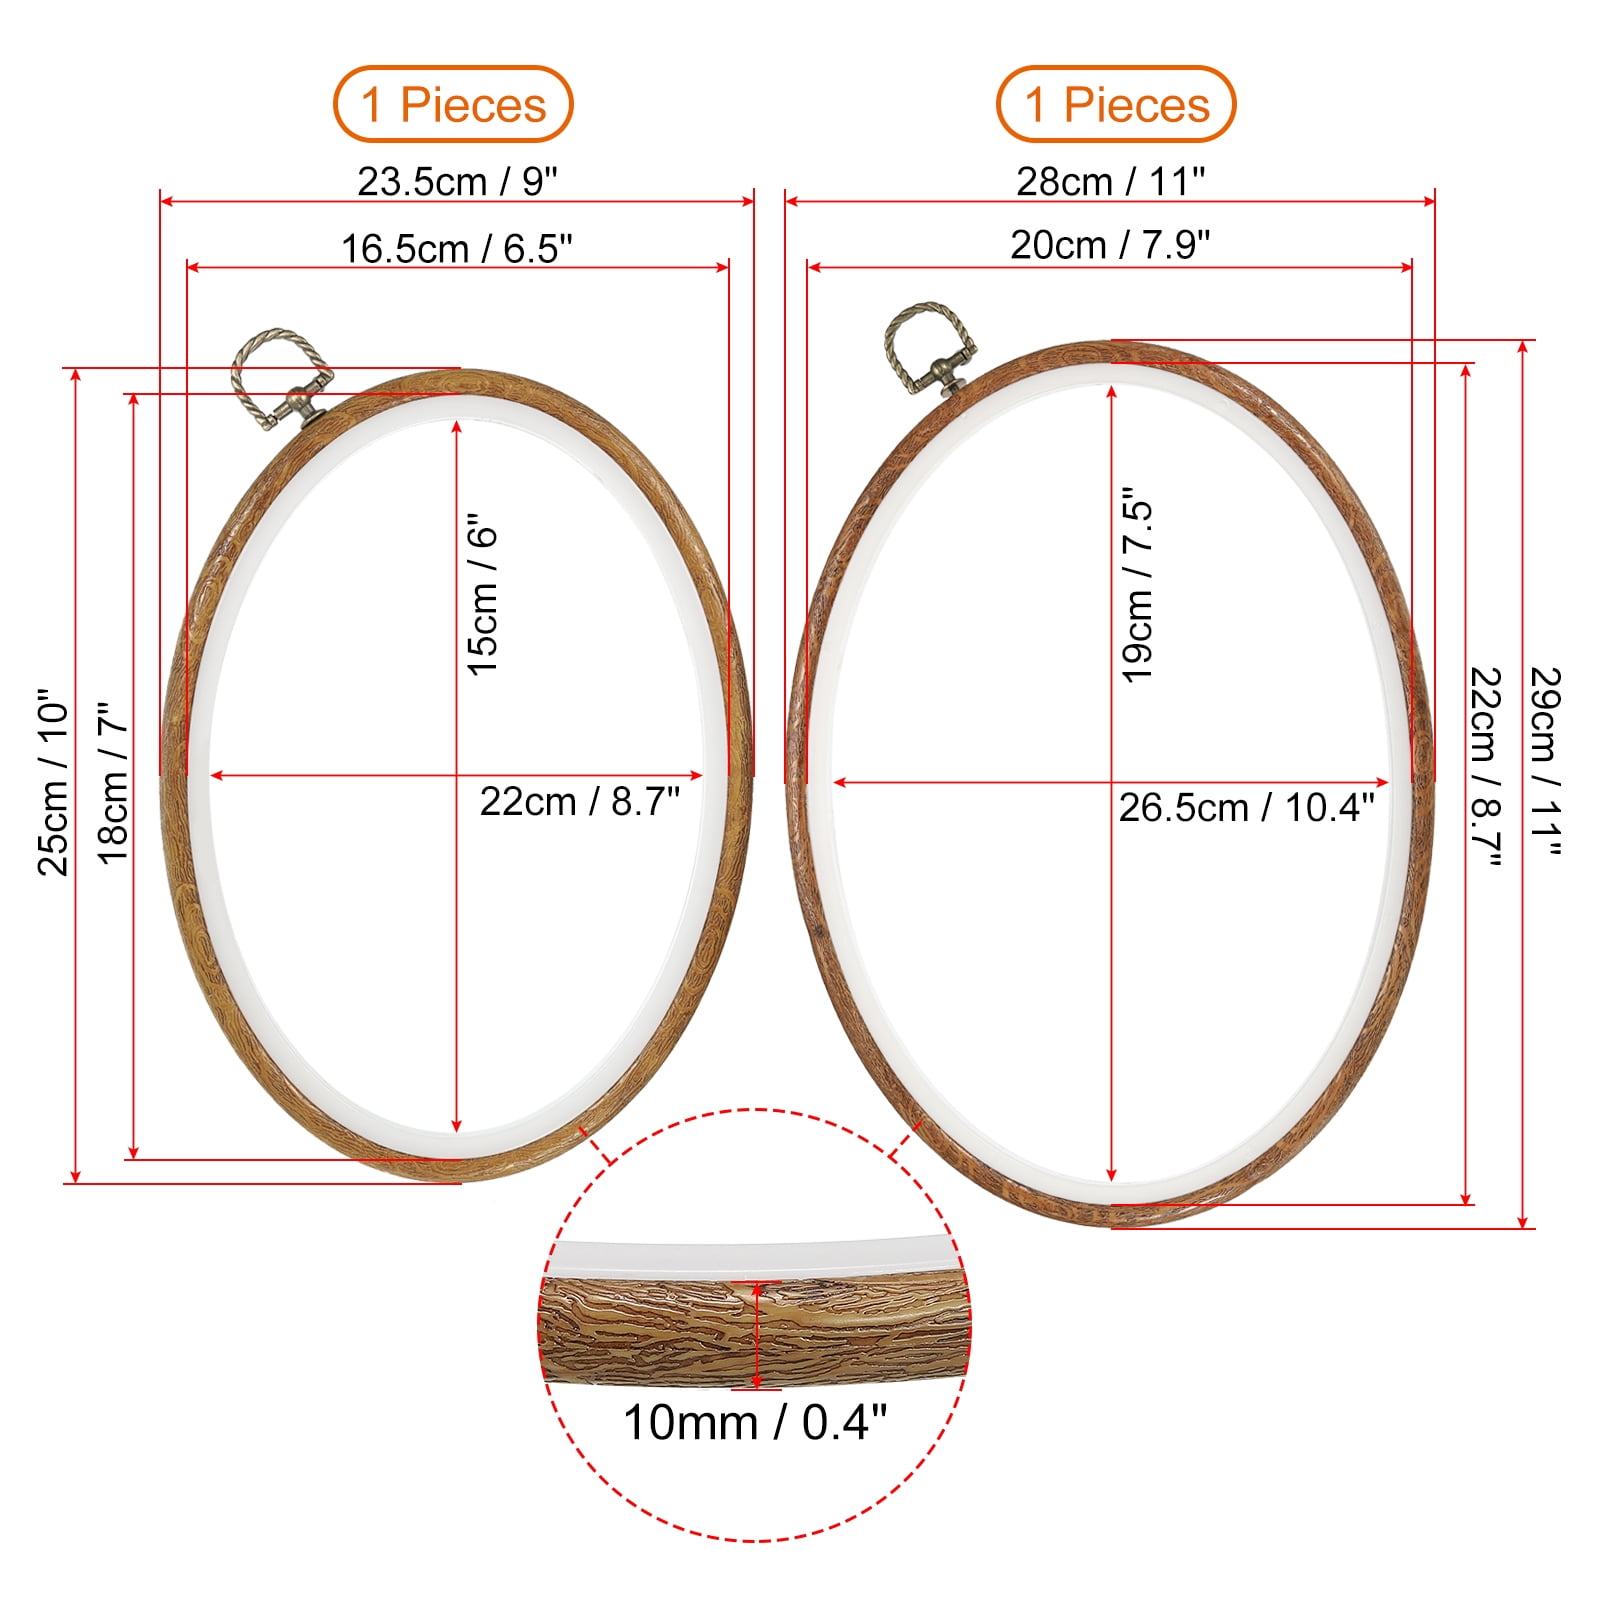 5 Pieces 10 inch Round Embroidery Hoops, Imitated Wood Hoop Embroidery  Frames for Display, Cross Stitch Embroidery Round Hoops Arts Decoration